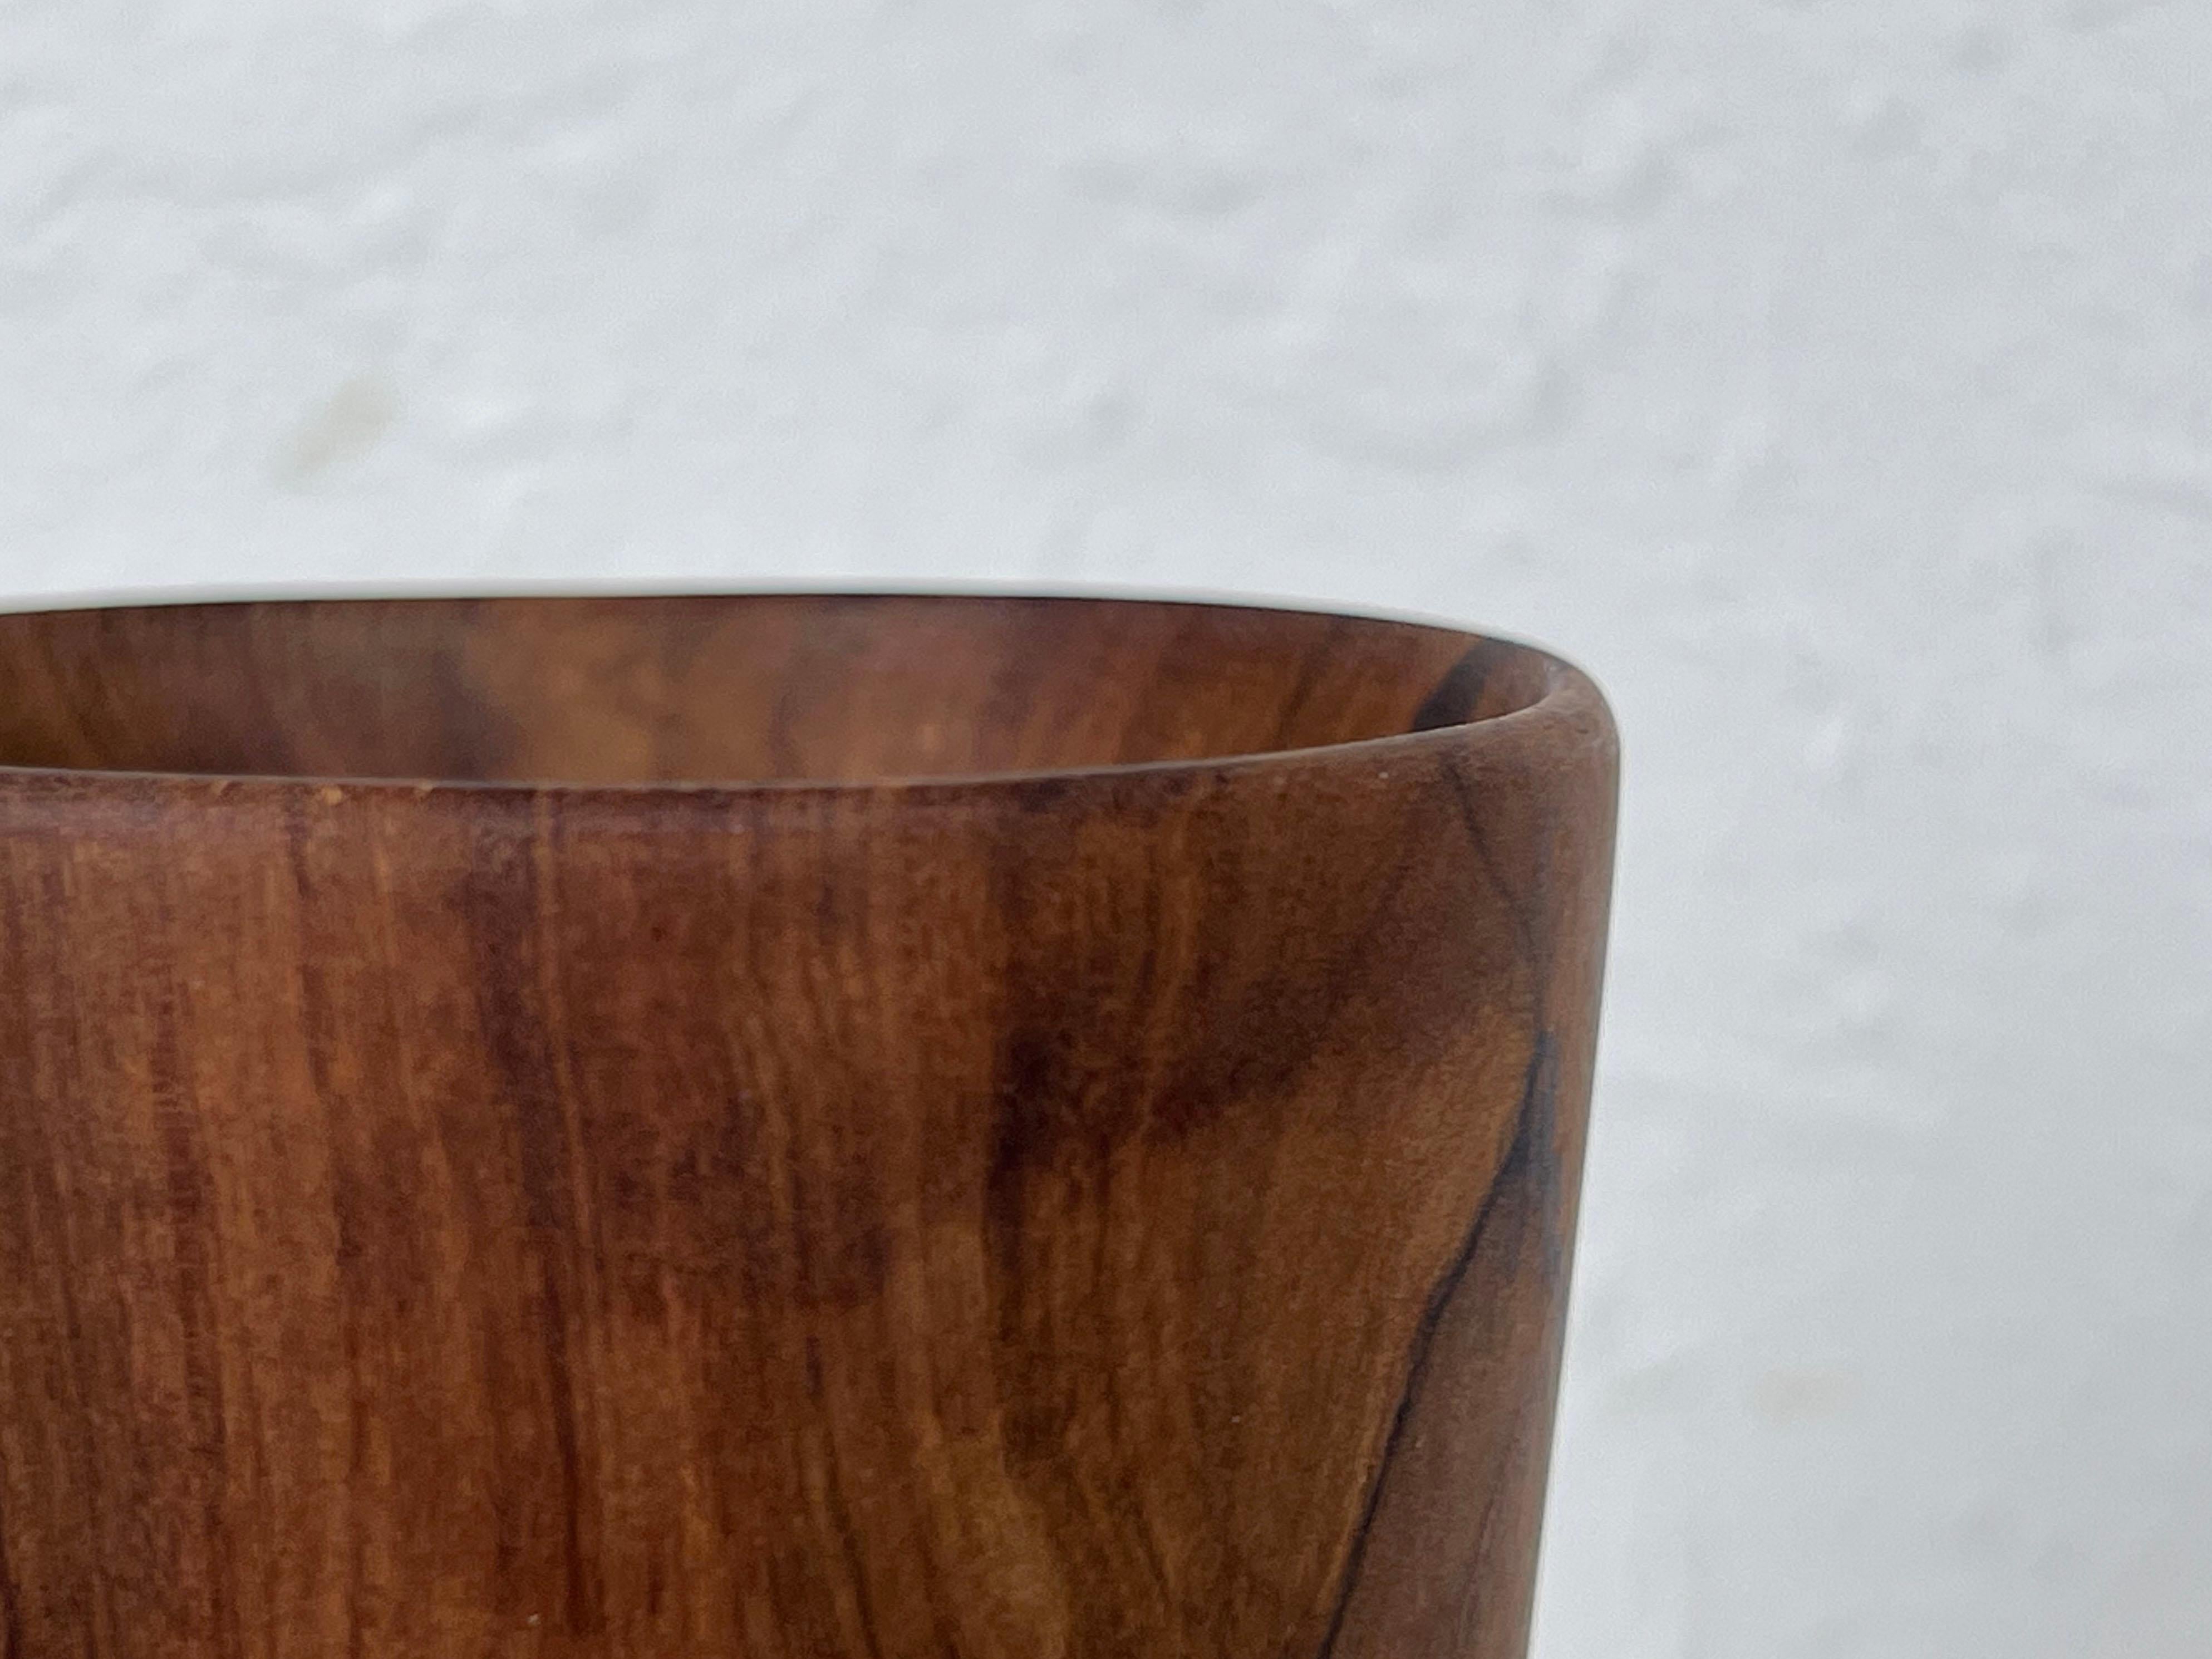  Vintage Hand-Turned Solid Teak Wood Cup In Excellent Condition For Sale In Fort Lauderdale, FL